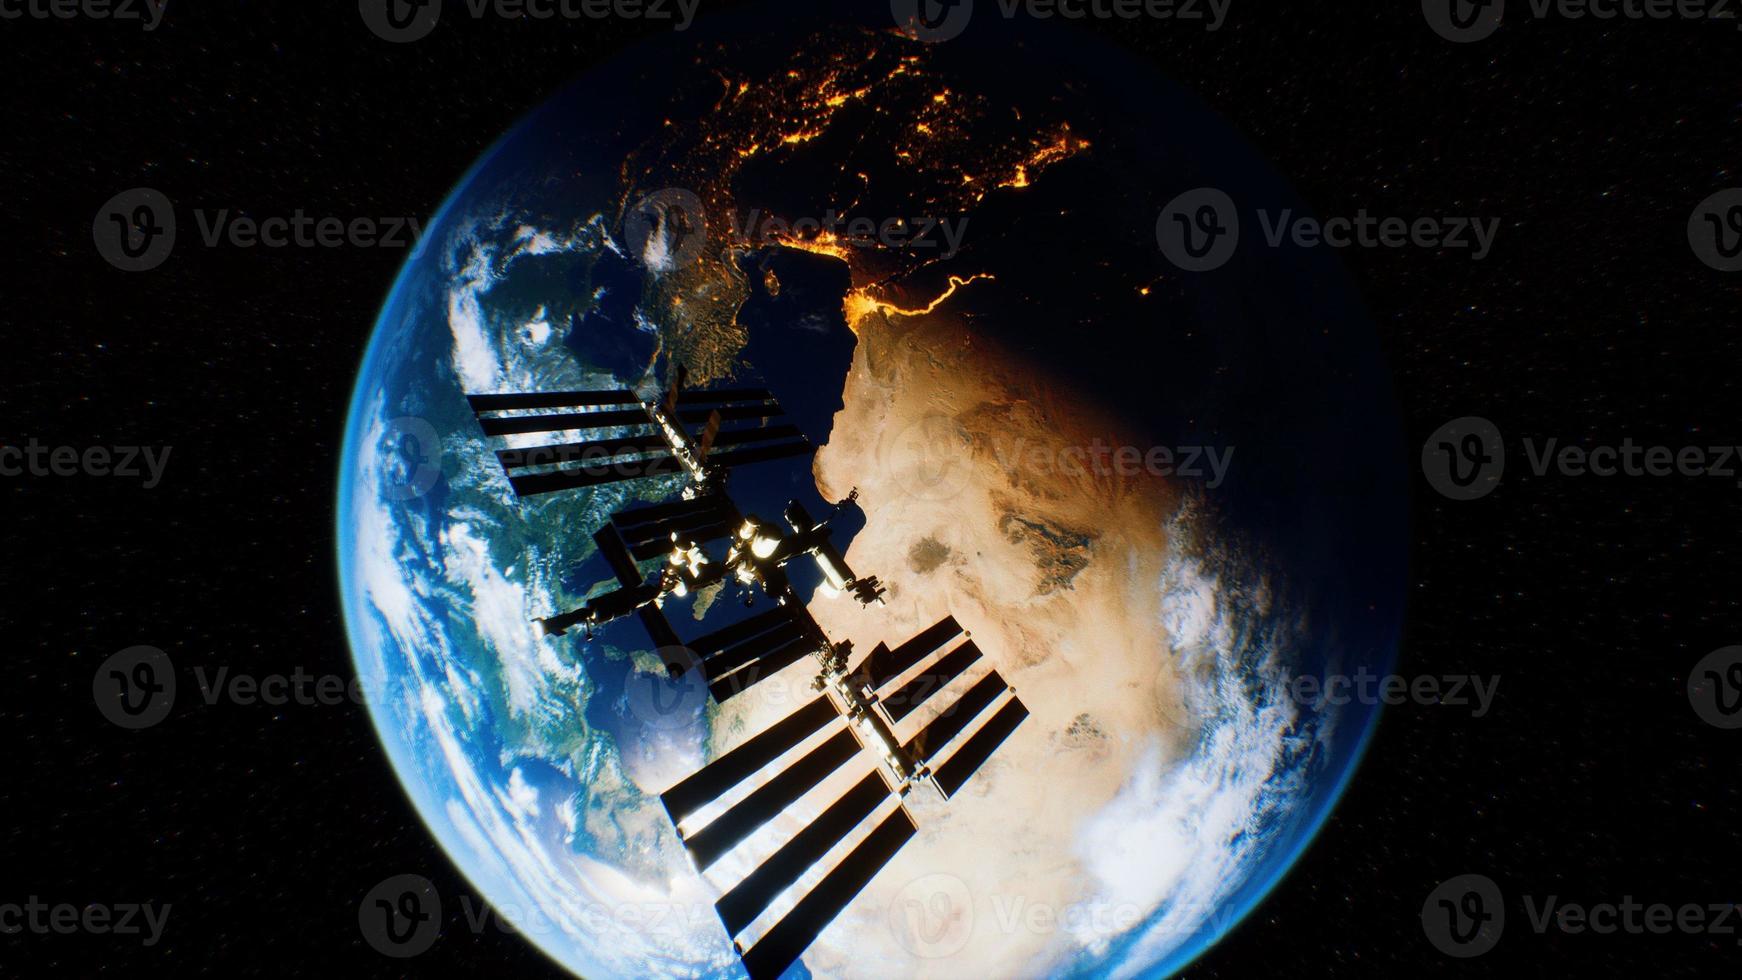 International Space Station in outer space over the planet Earth orbit photo